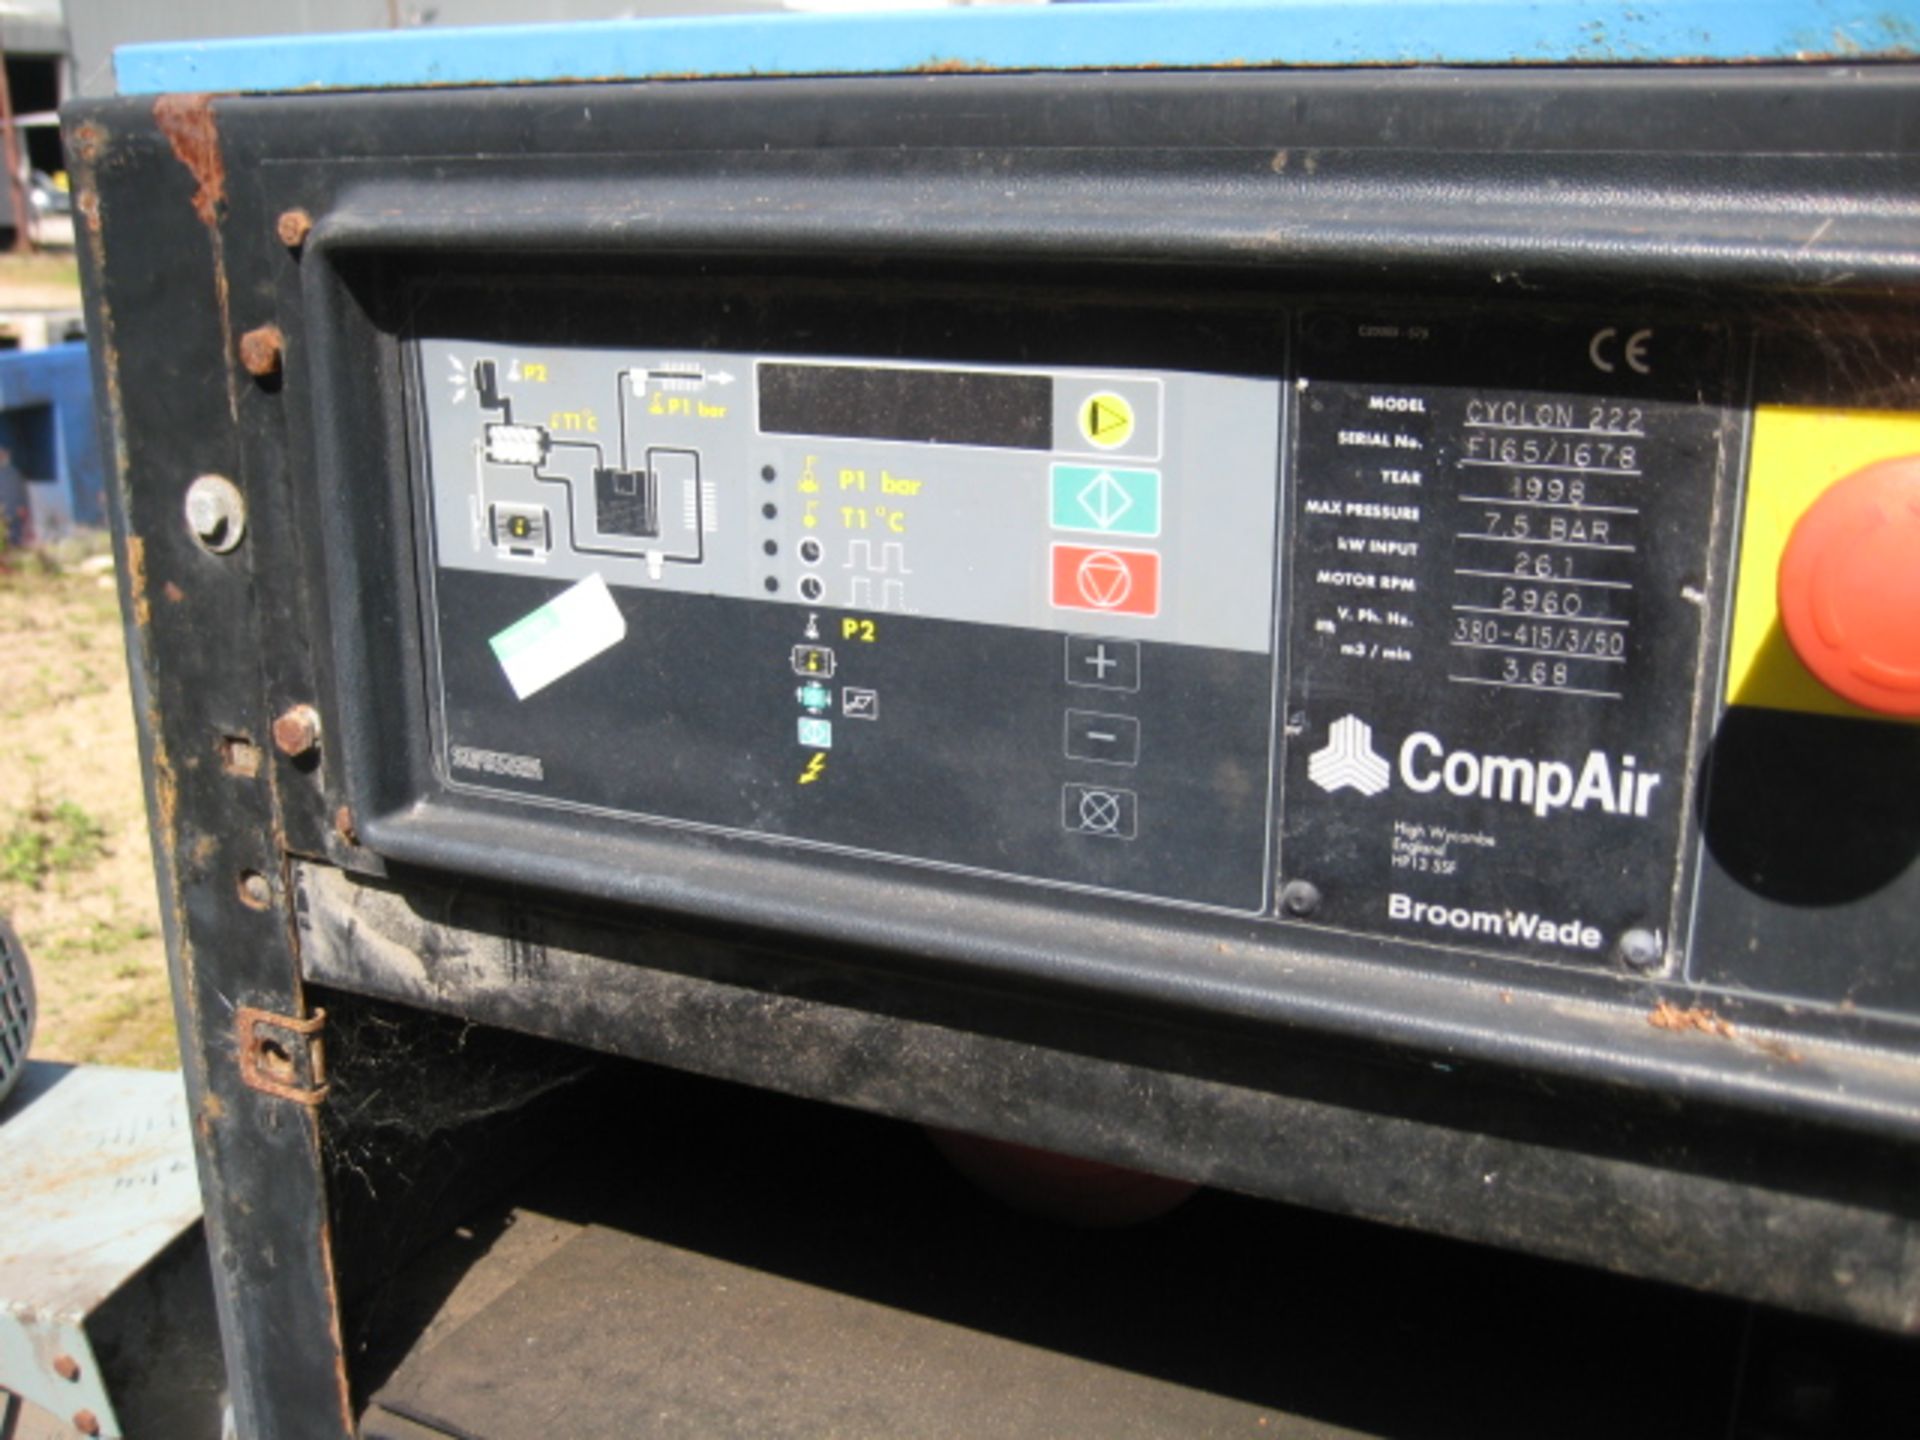 Broomwade Compair Cyclon 22 Compressor, serial no. F165/1678, year of manufacture 1998, in - Image 3 of 5